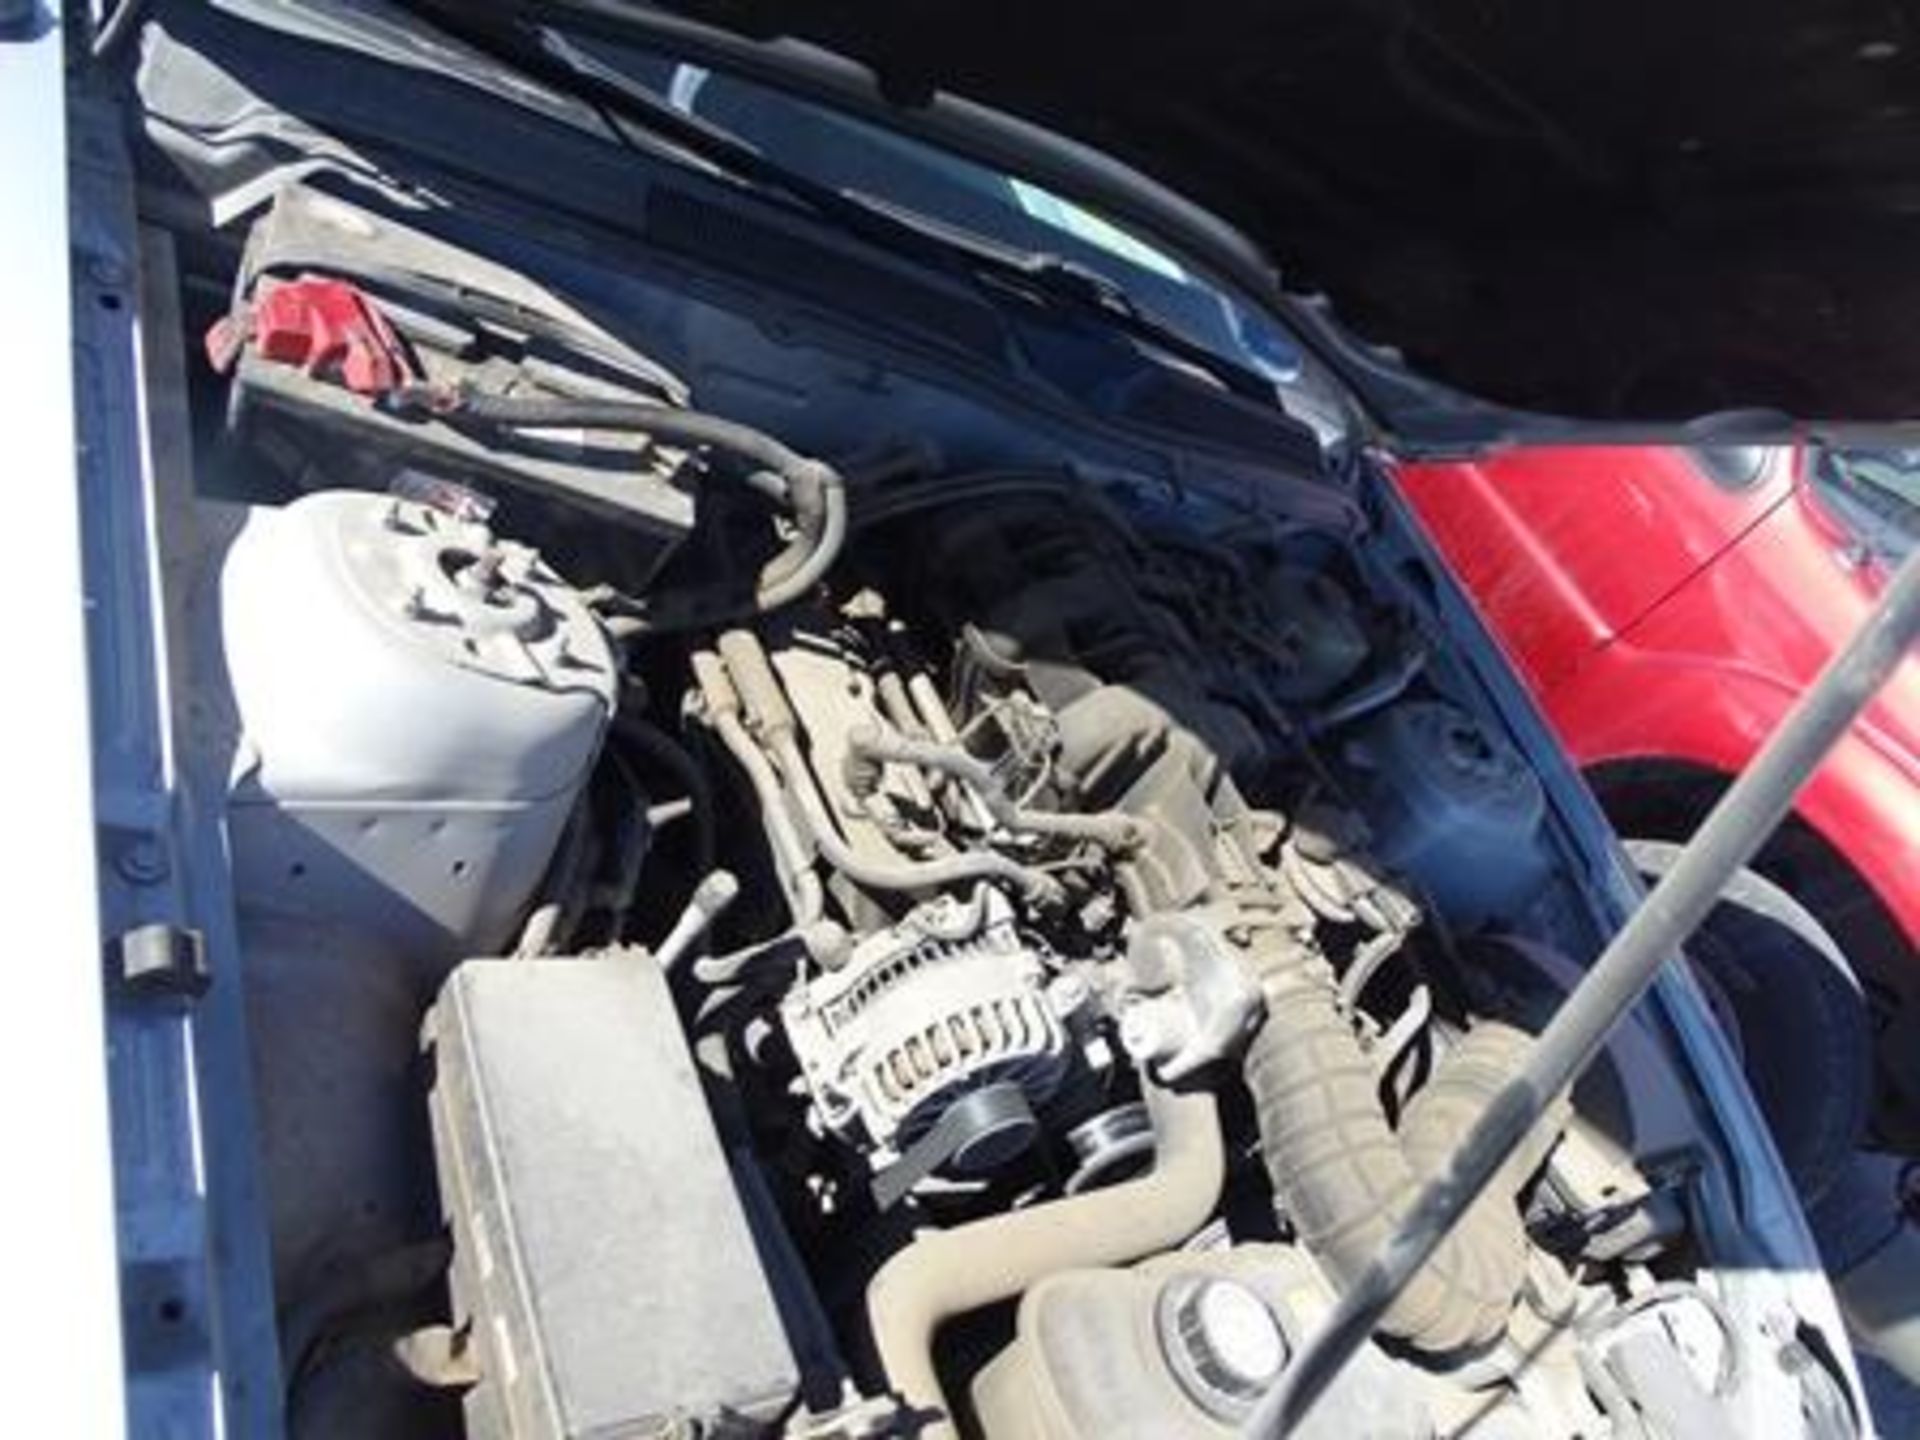 Vehículo Marca Ford Mustang, Tipo Sedan, Modelo 2007, Located In: Chihuahua, Deposit Of: $5000 - Image 16 of 17